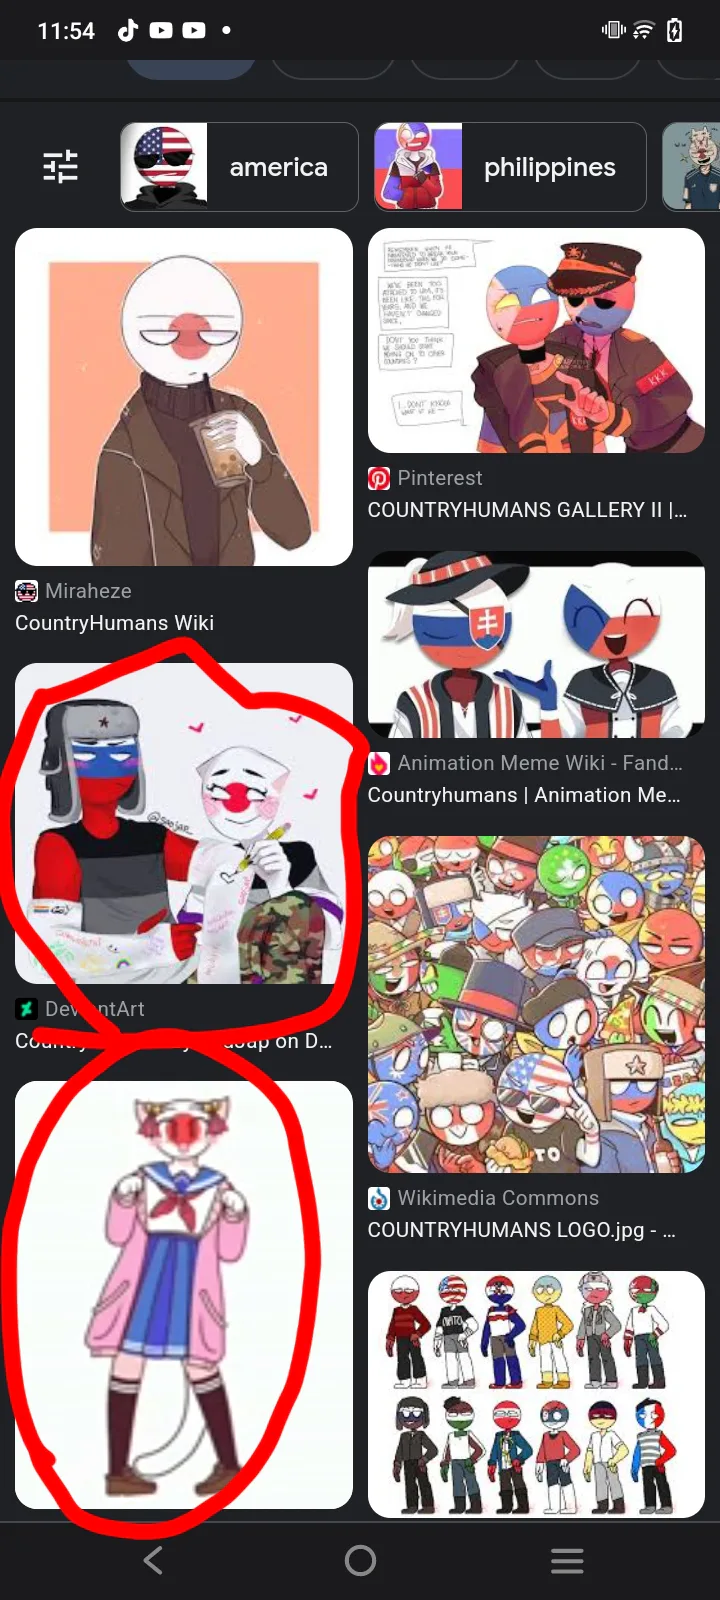 COUNTRYHUMANS GALLERY II  Country memes, Philippines country, Country art